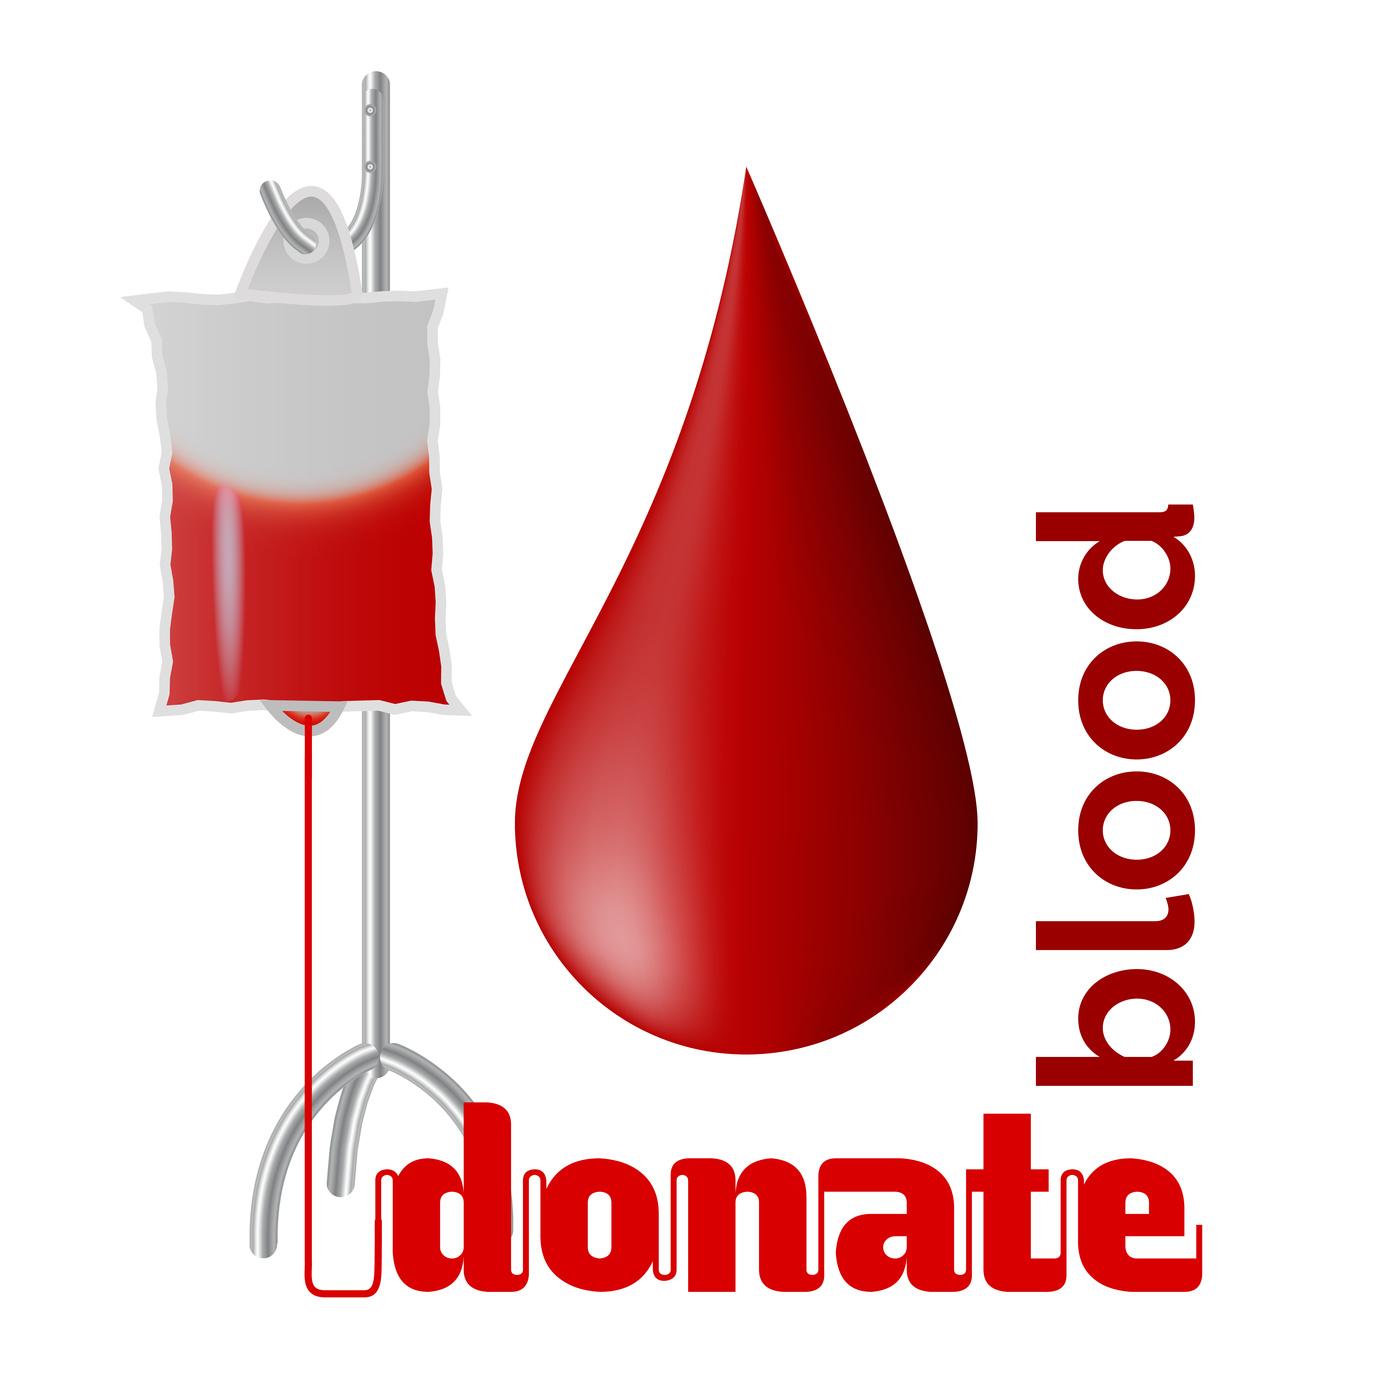 Donate Blood Save Life Logo - January is National Blood Donor Month